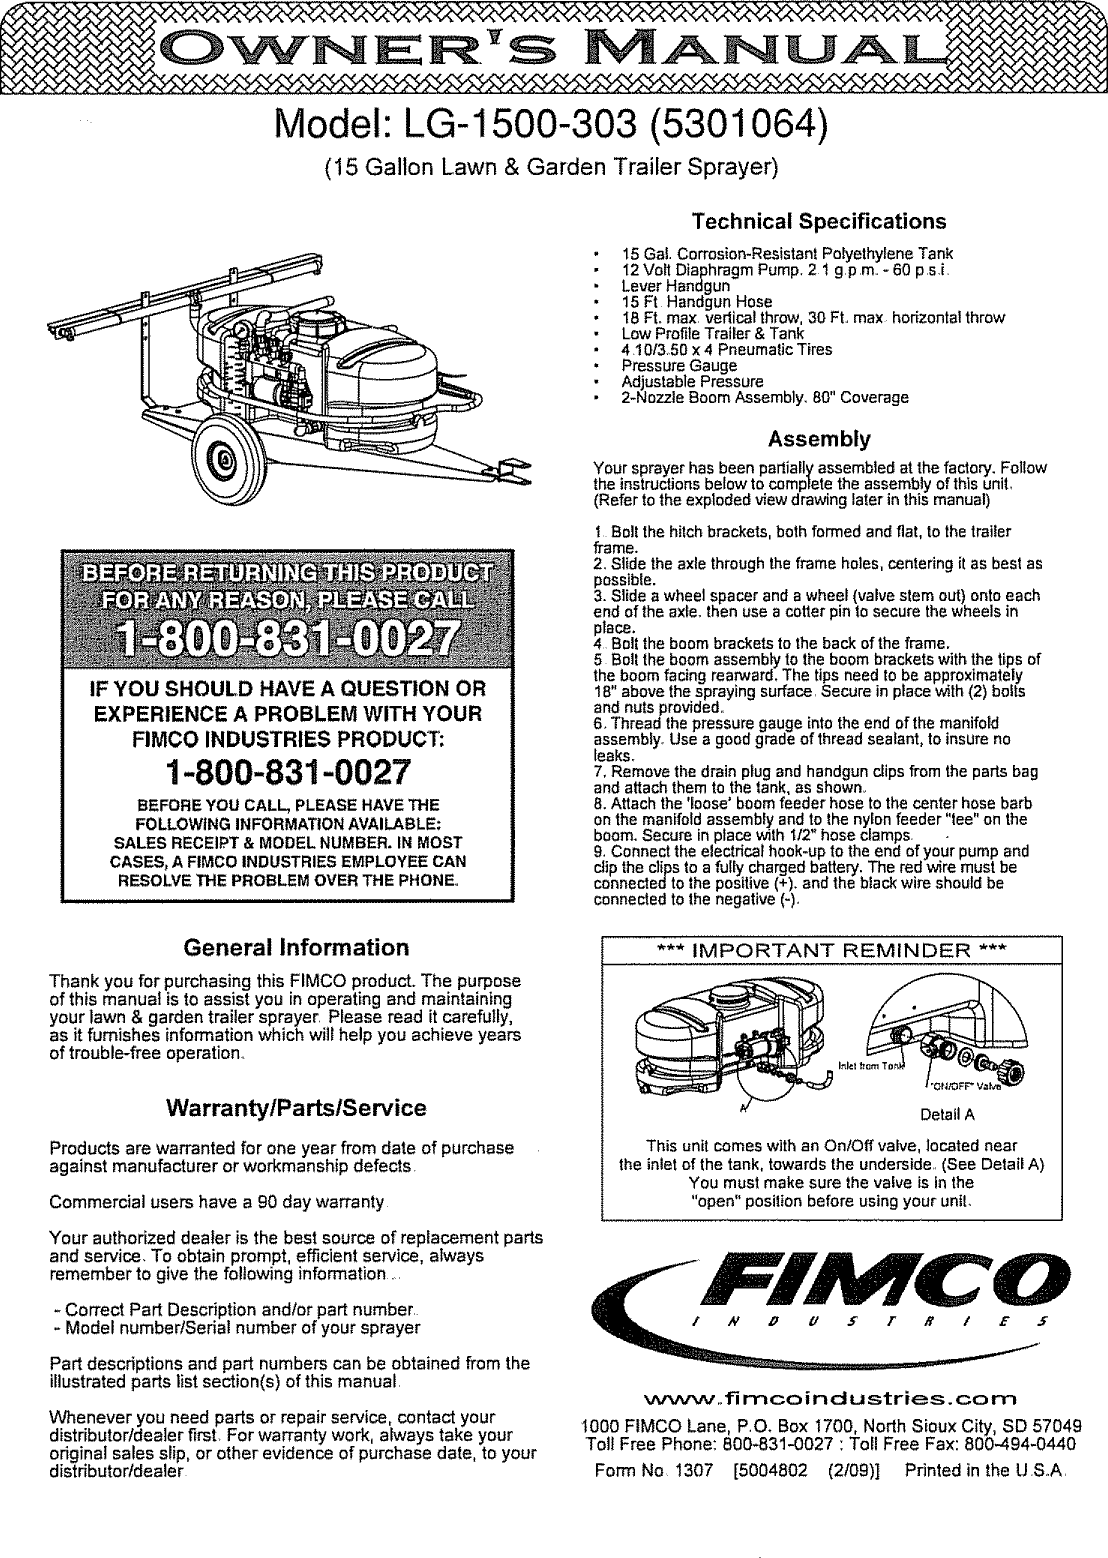 Page 1 of 4 - Fimco LG-1500-303 User Manual  LAWN & GARDEN TRAILER SPRAYER - Manuals And Guides 1007366L